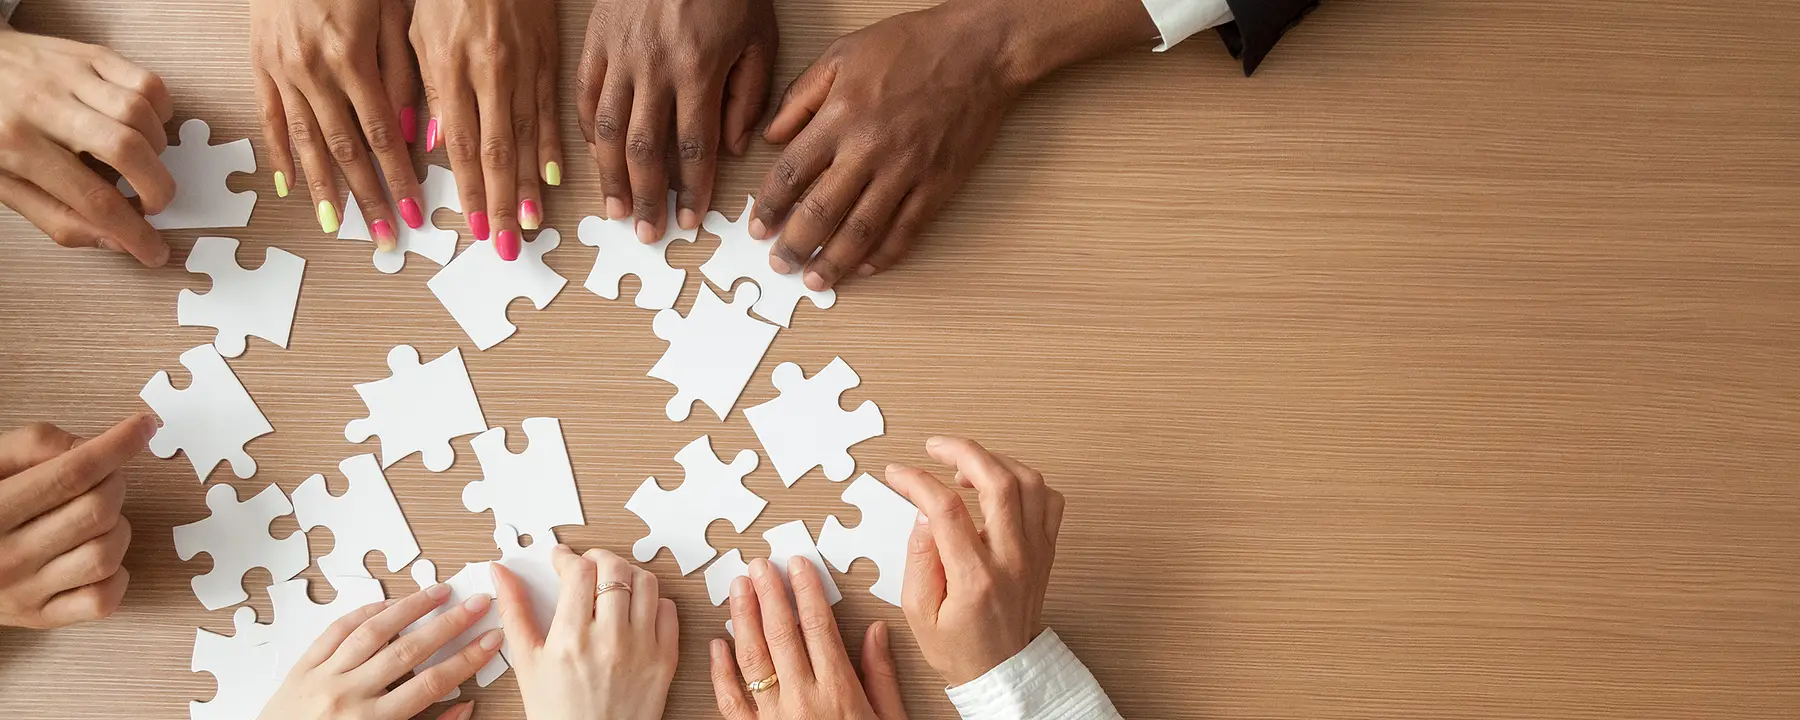 A closeup of people's hands as they work together to assemble a puzzle.